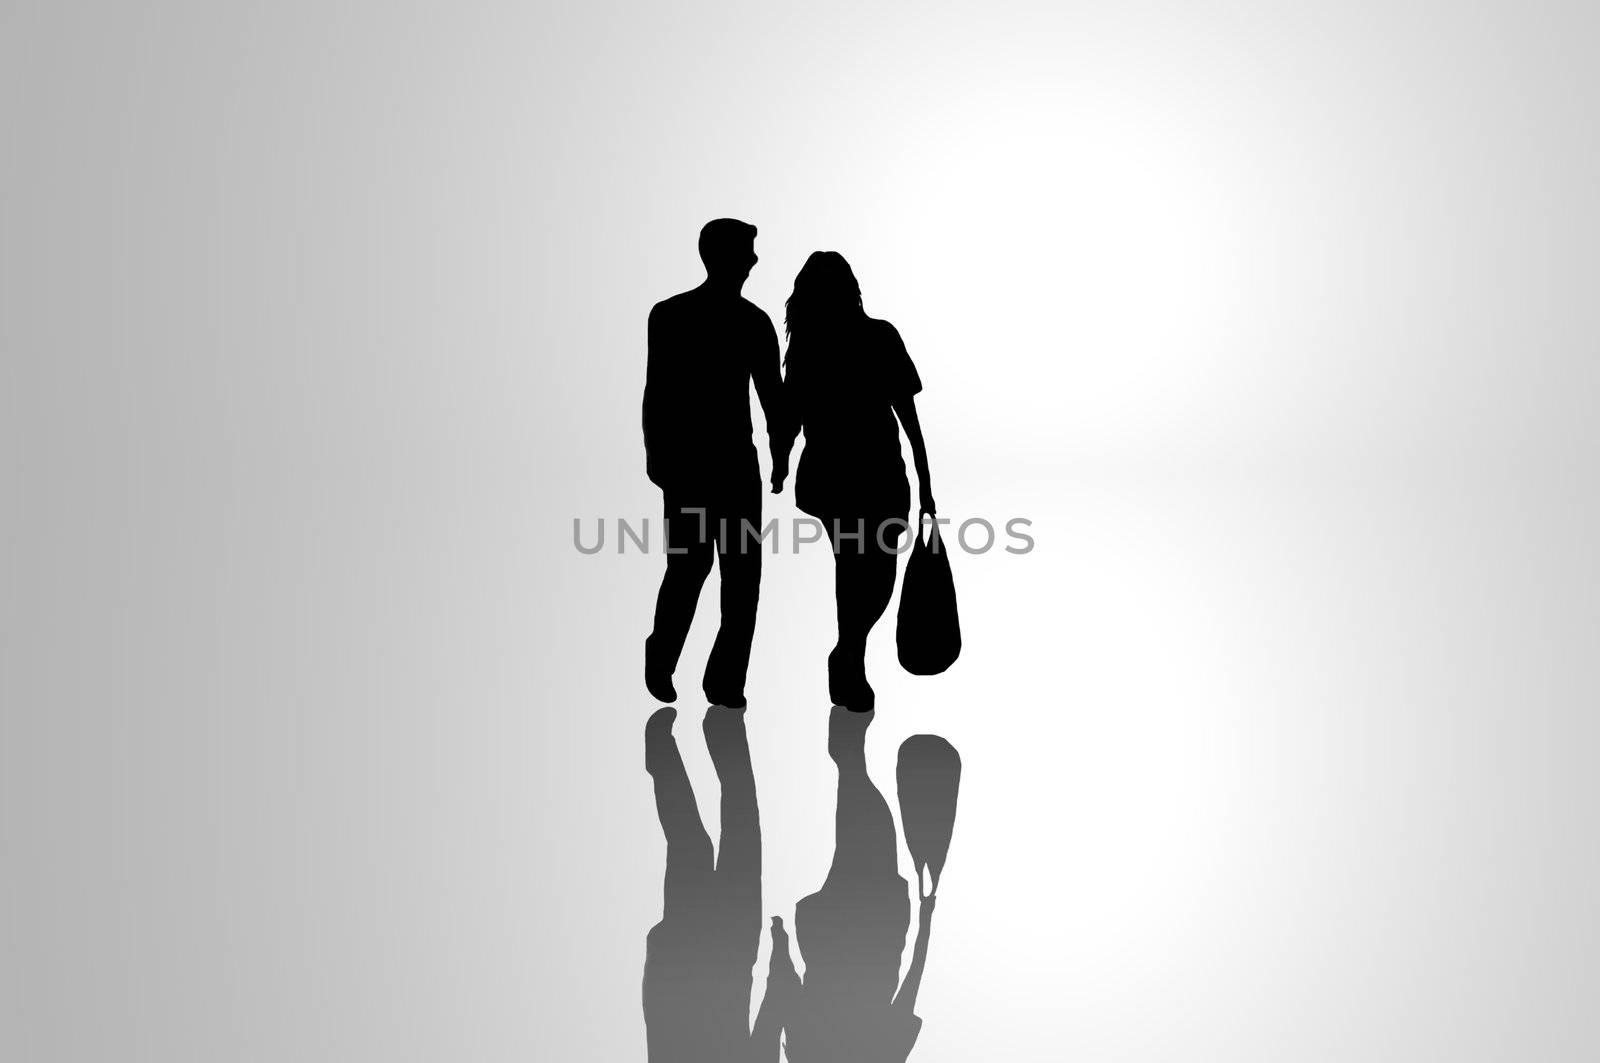 A silhouetted young couple walking on reflective surface towards a bright light with grey background.